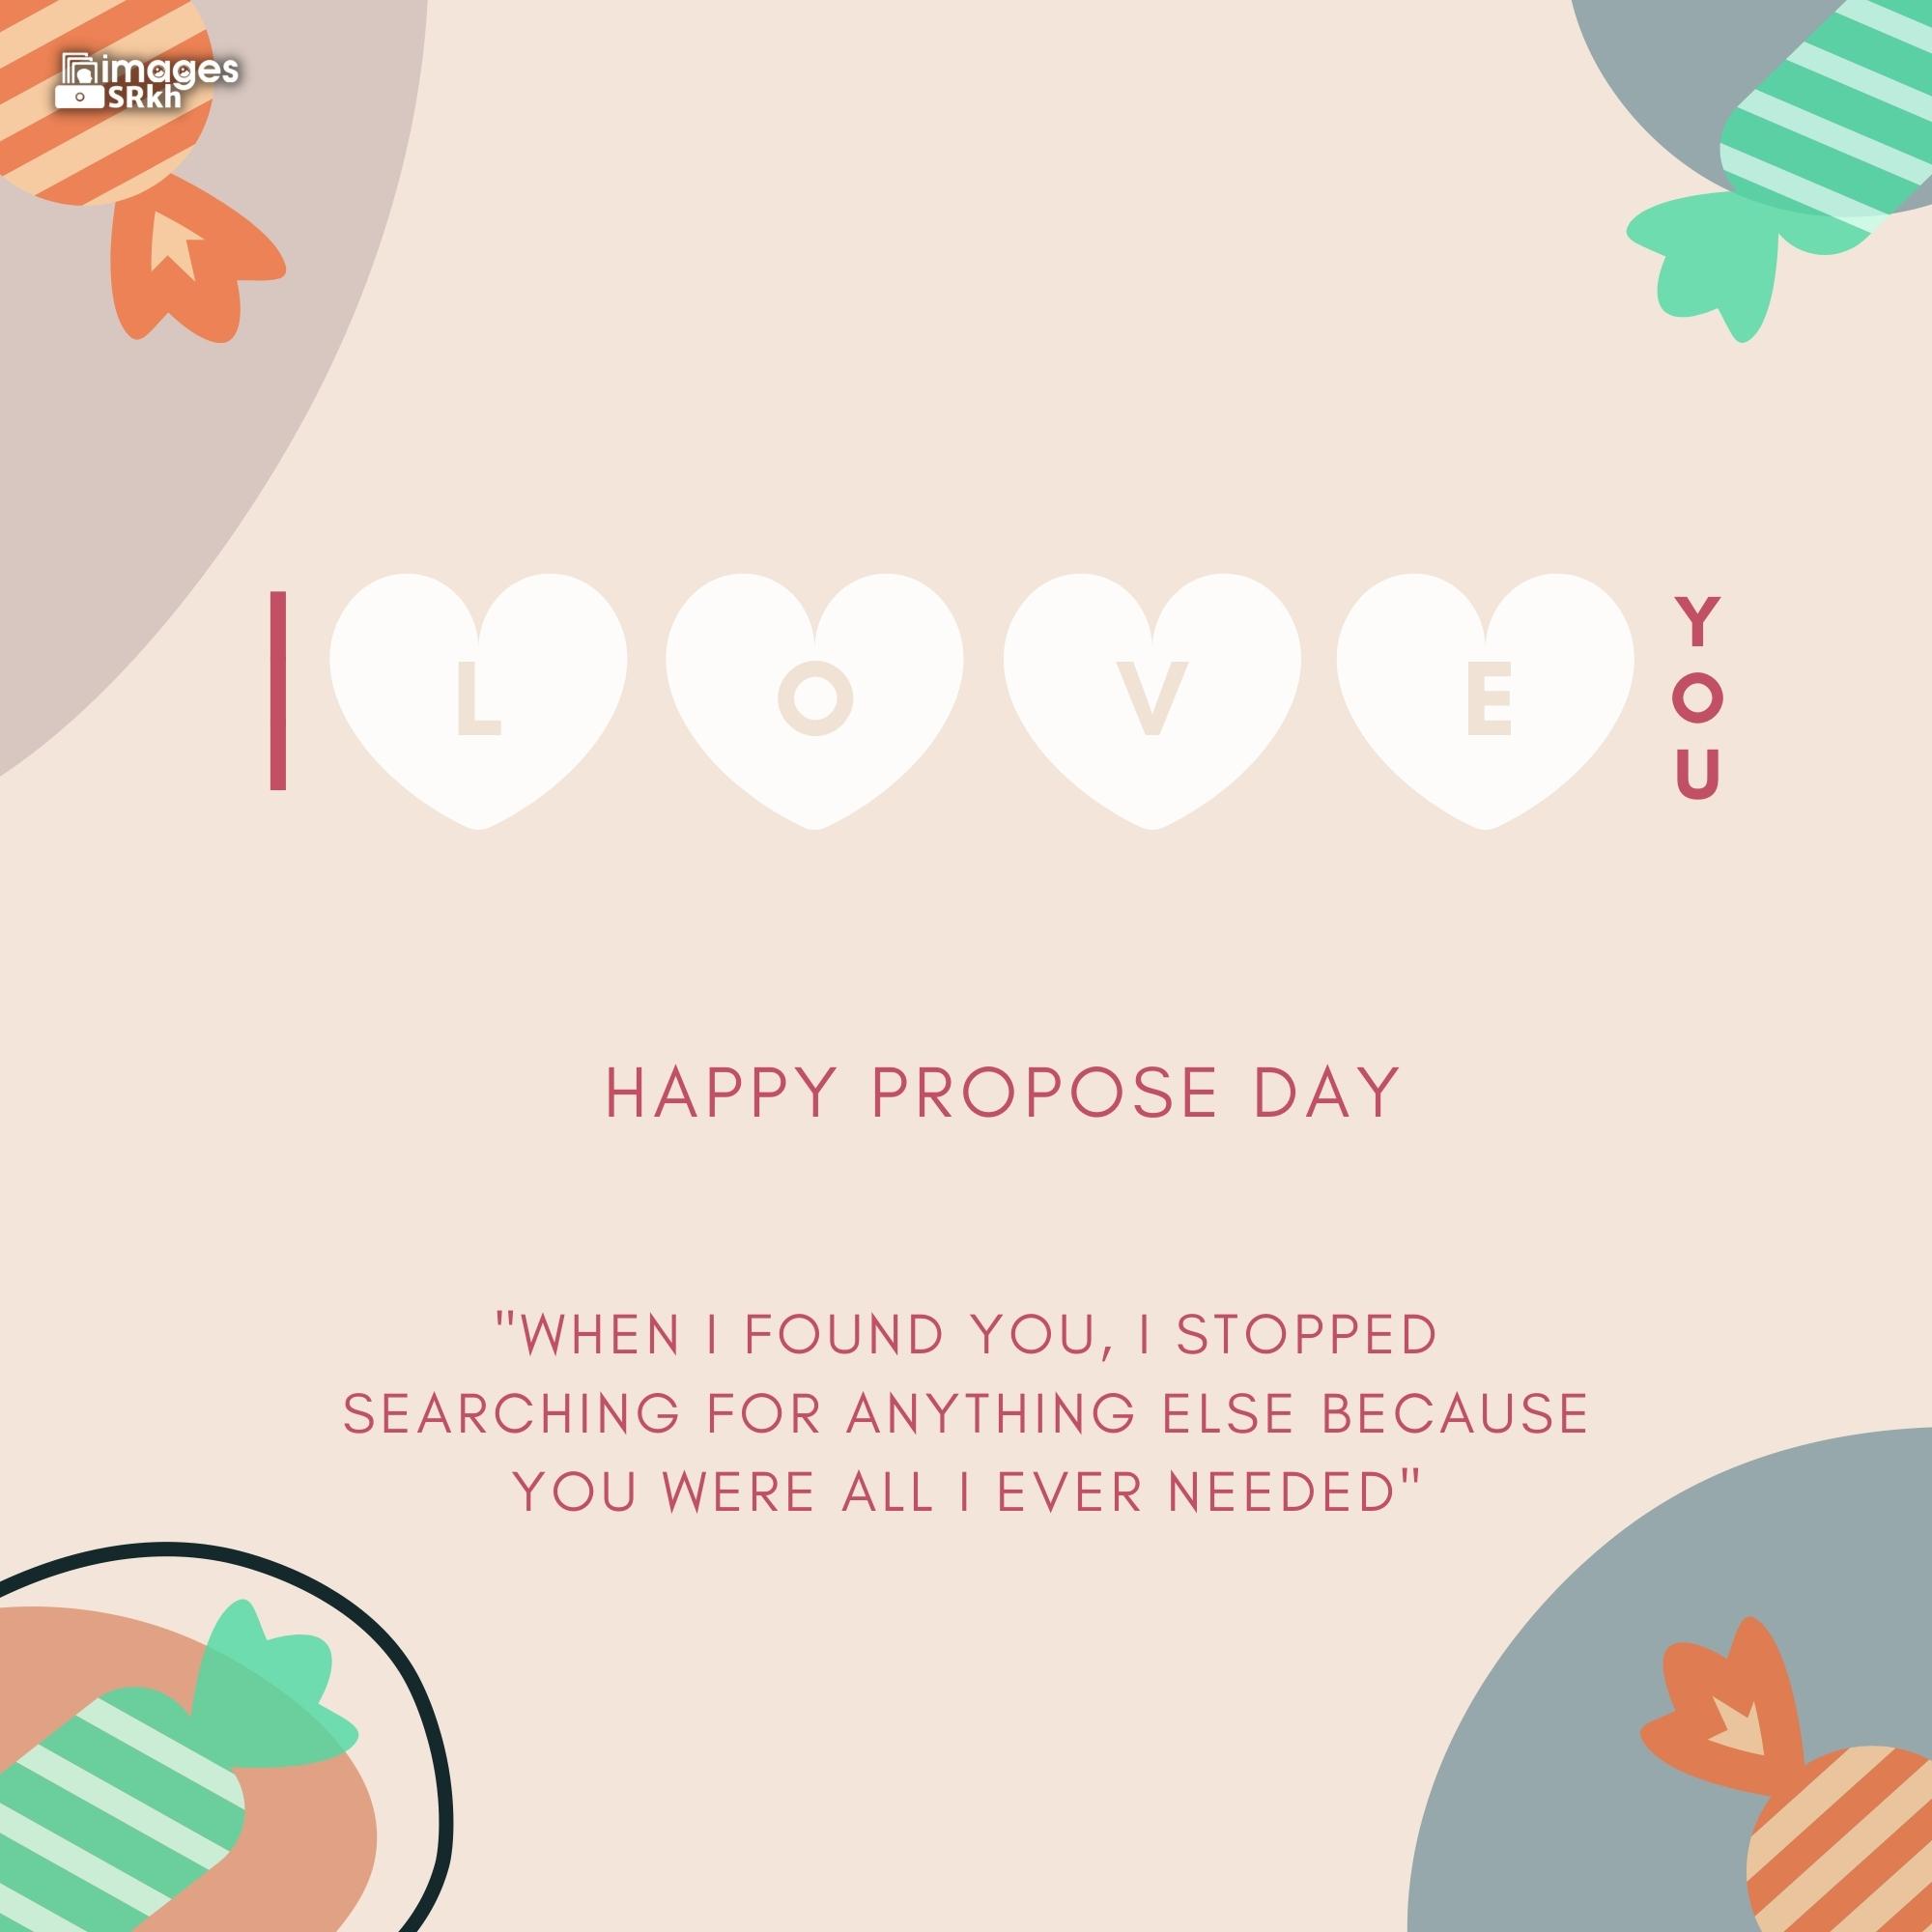 Happy Propose Day Images | 412 | I LOVE YOU